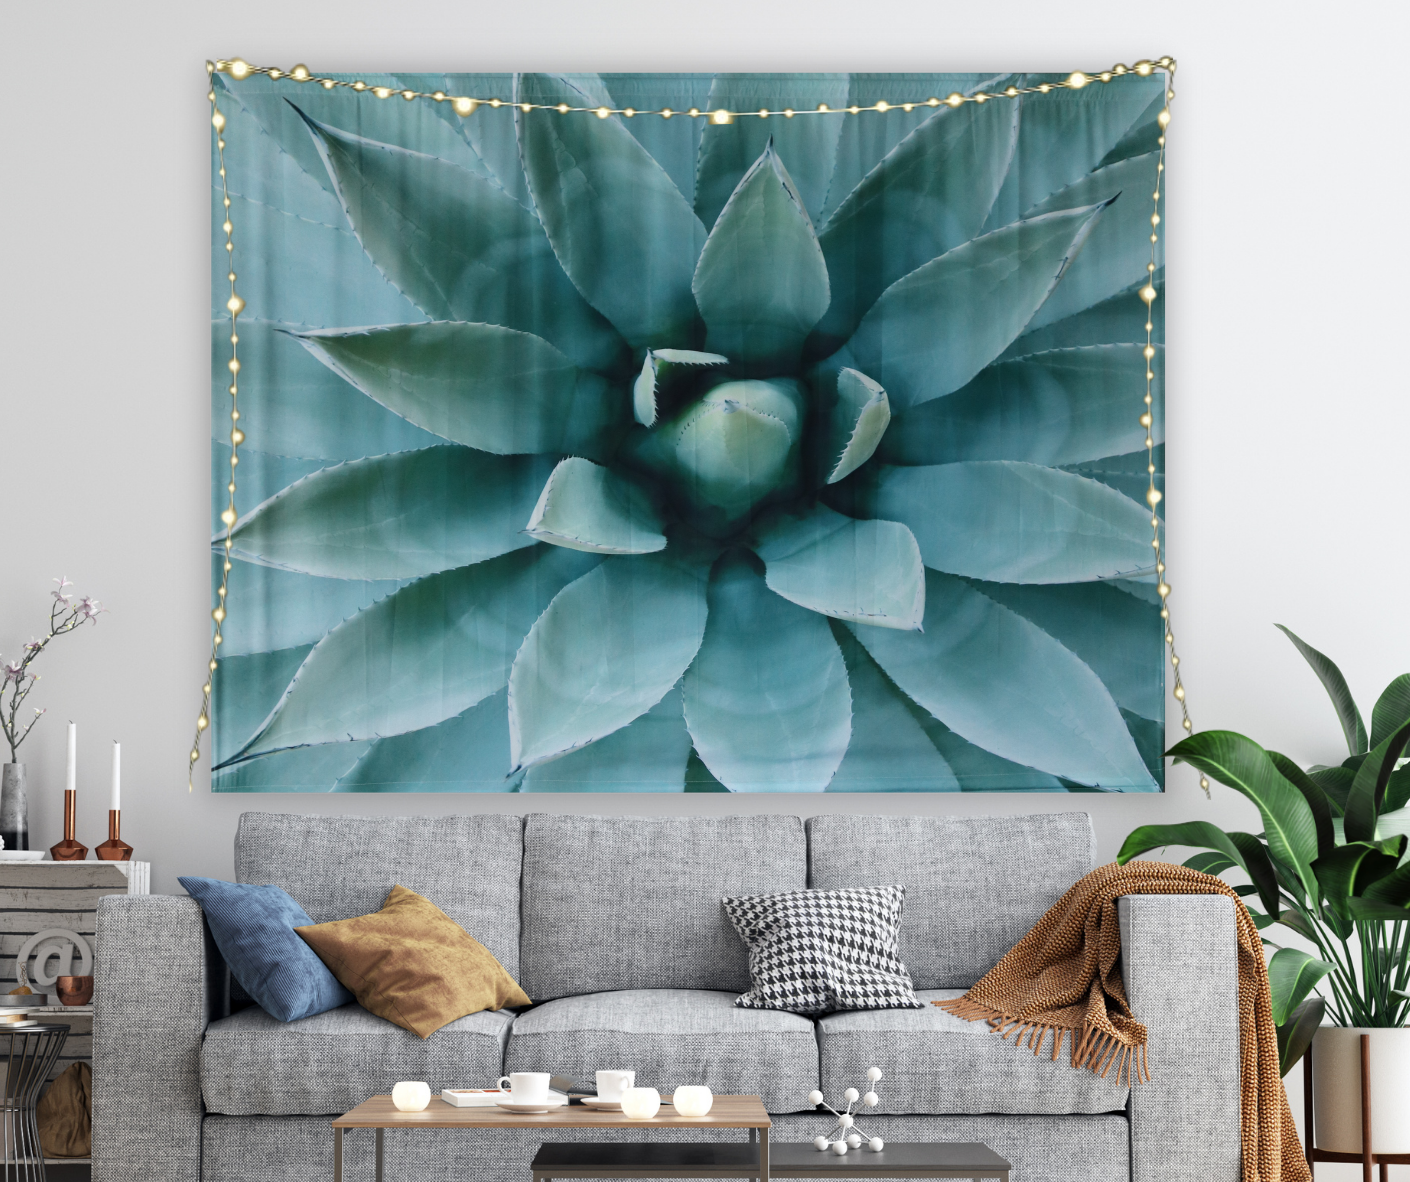 KaiSha LED Tapestry Wall Hanging; Bohemian Floral Wall Hanging Art Décor Large Boho Teal Flower Artwork (79"x59")